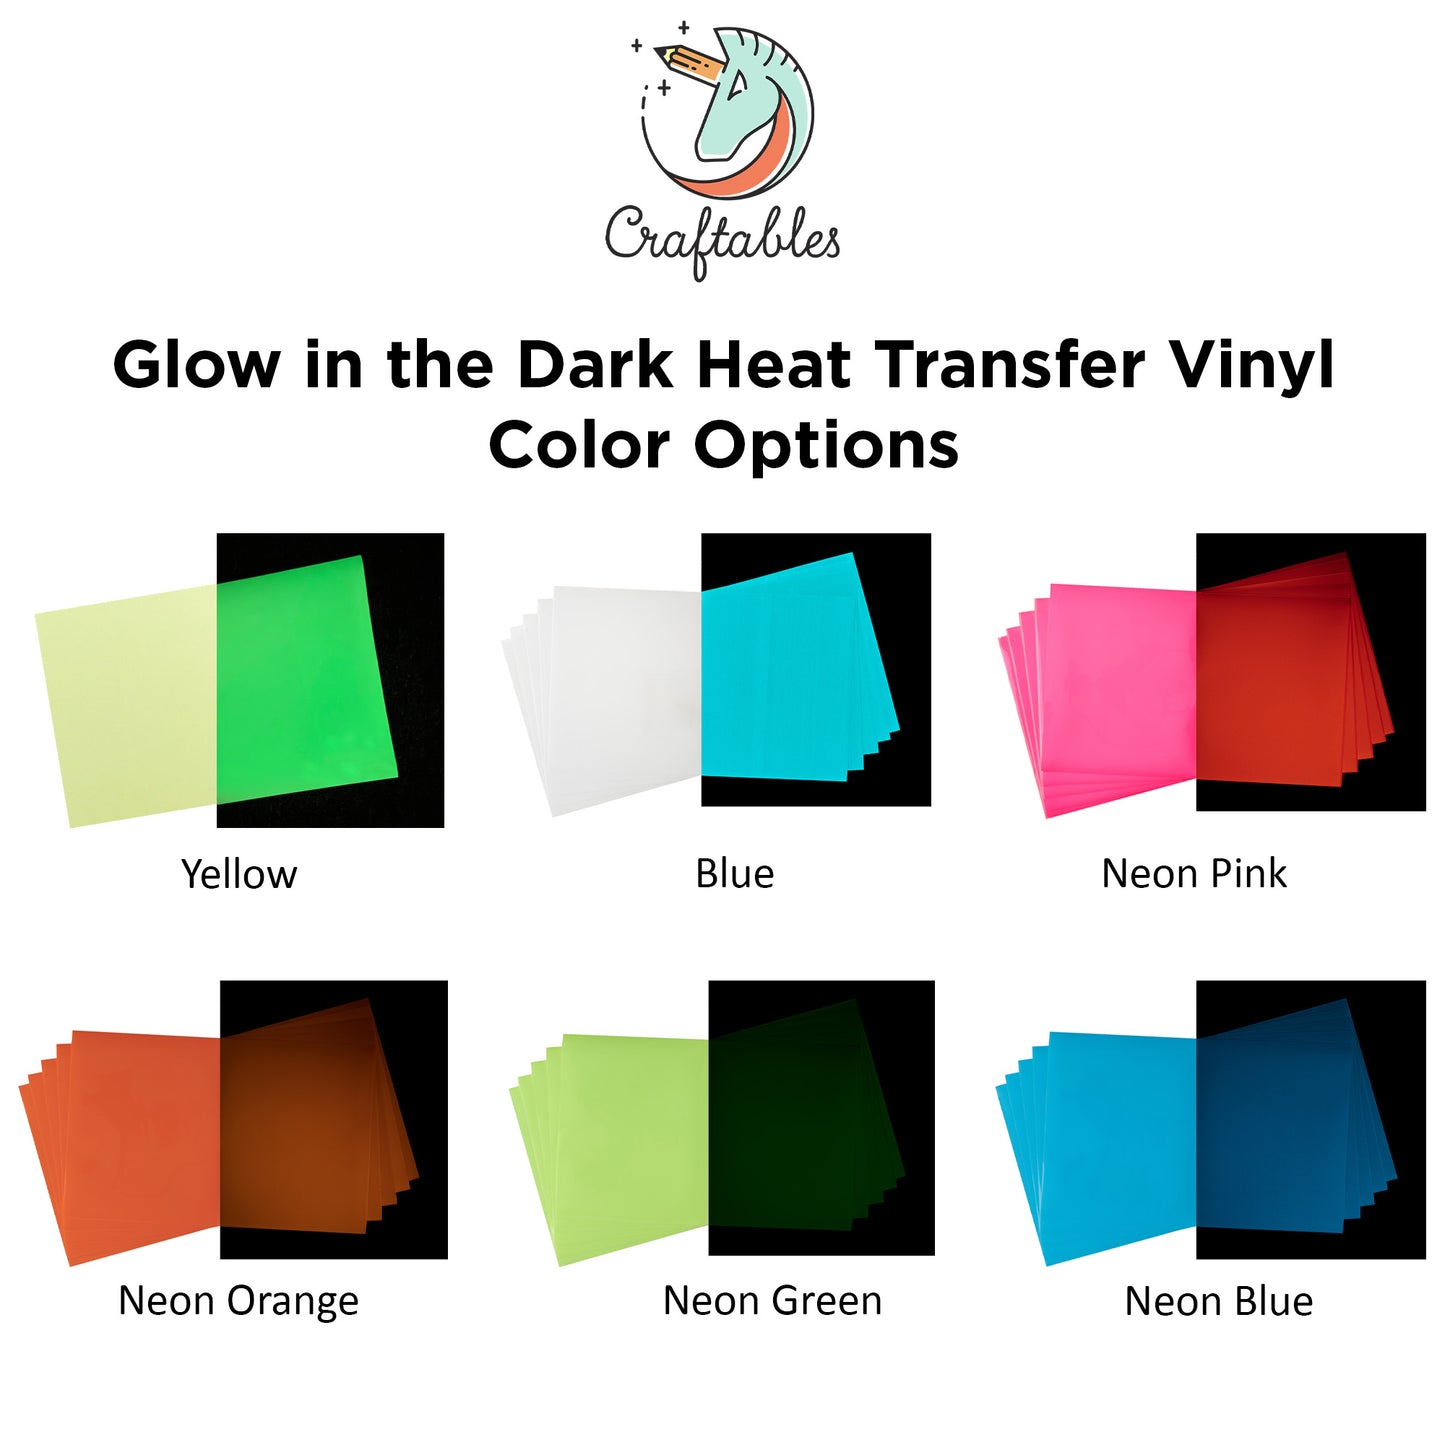 Neon Blue Glow in the Dark Heat Transfer Vinyl Sheets By Craftables